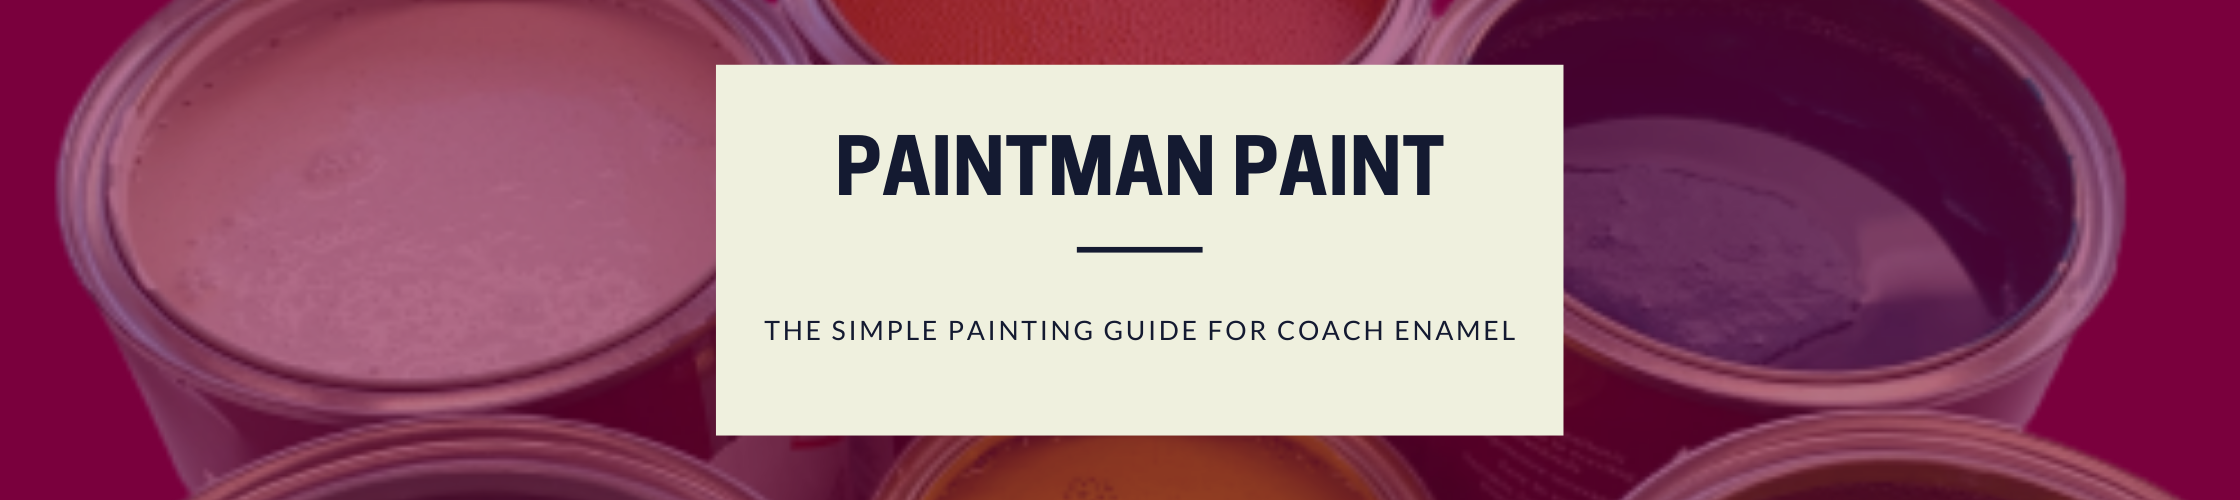 painting guide 2